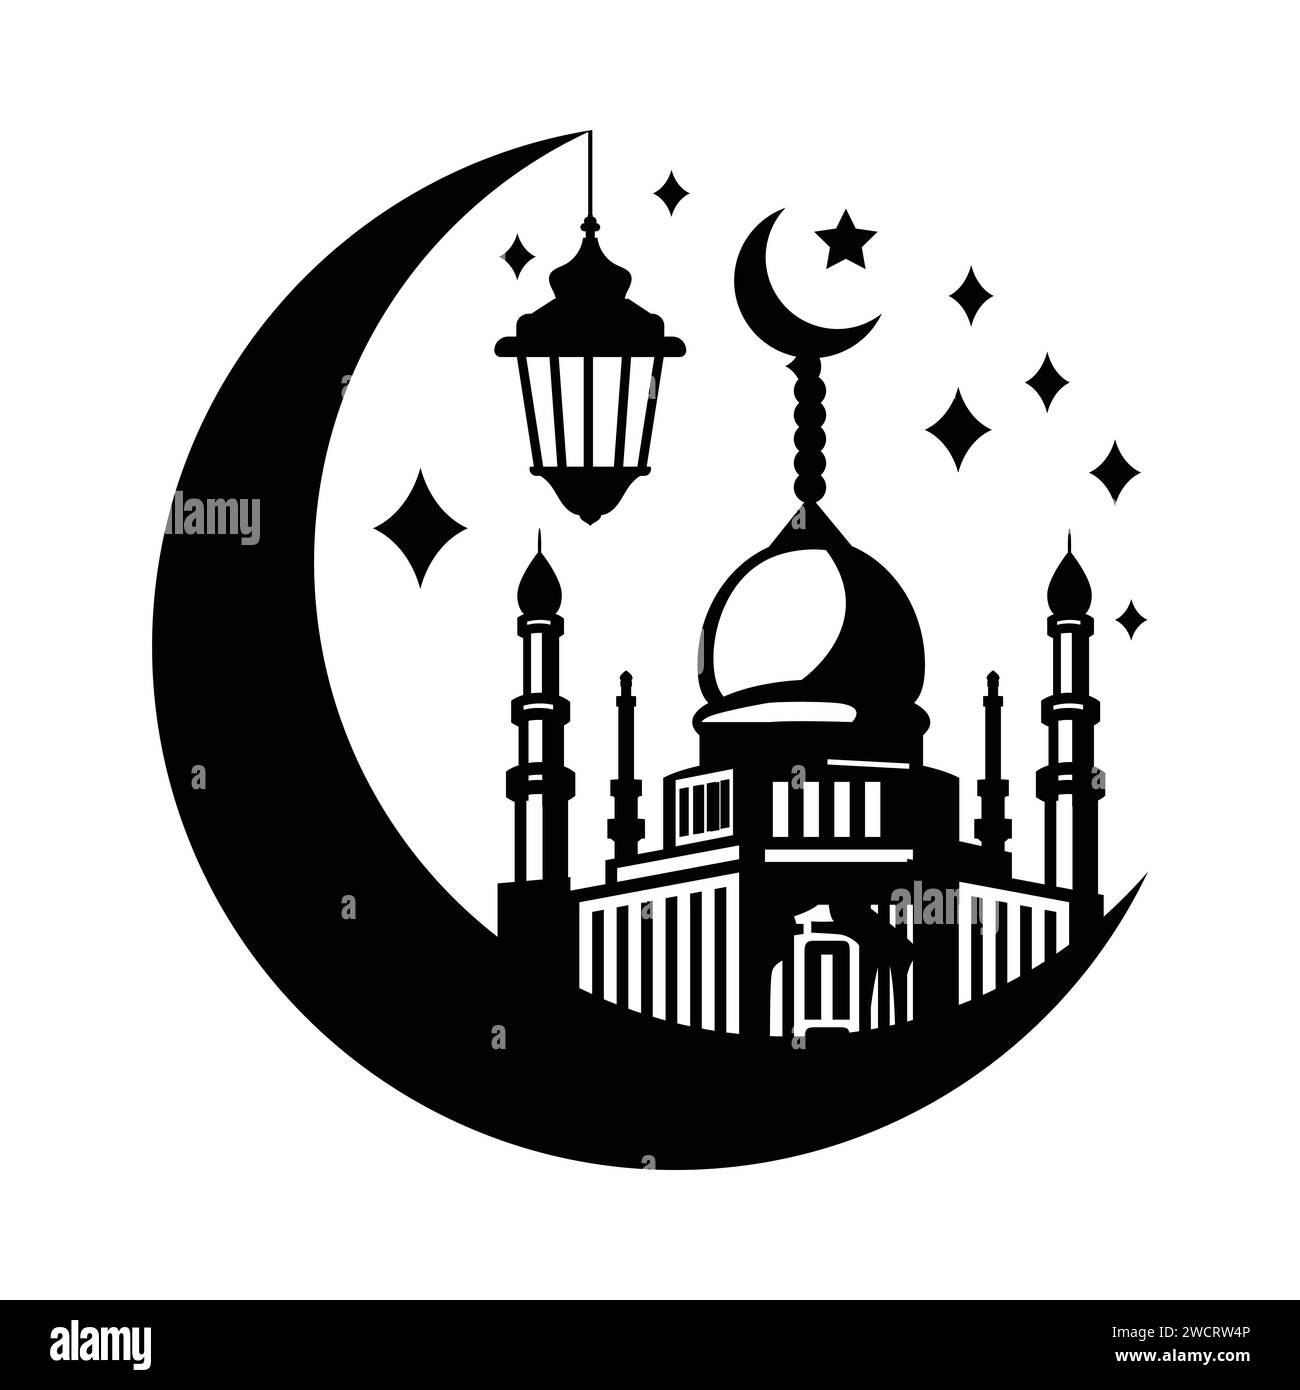 Mosque and crescent moon, hand drawn vector illustration design, isolated on crescent moon and lantern design. Stock Vector